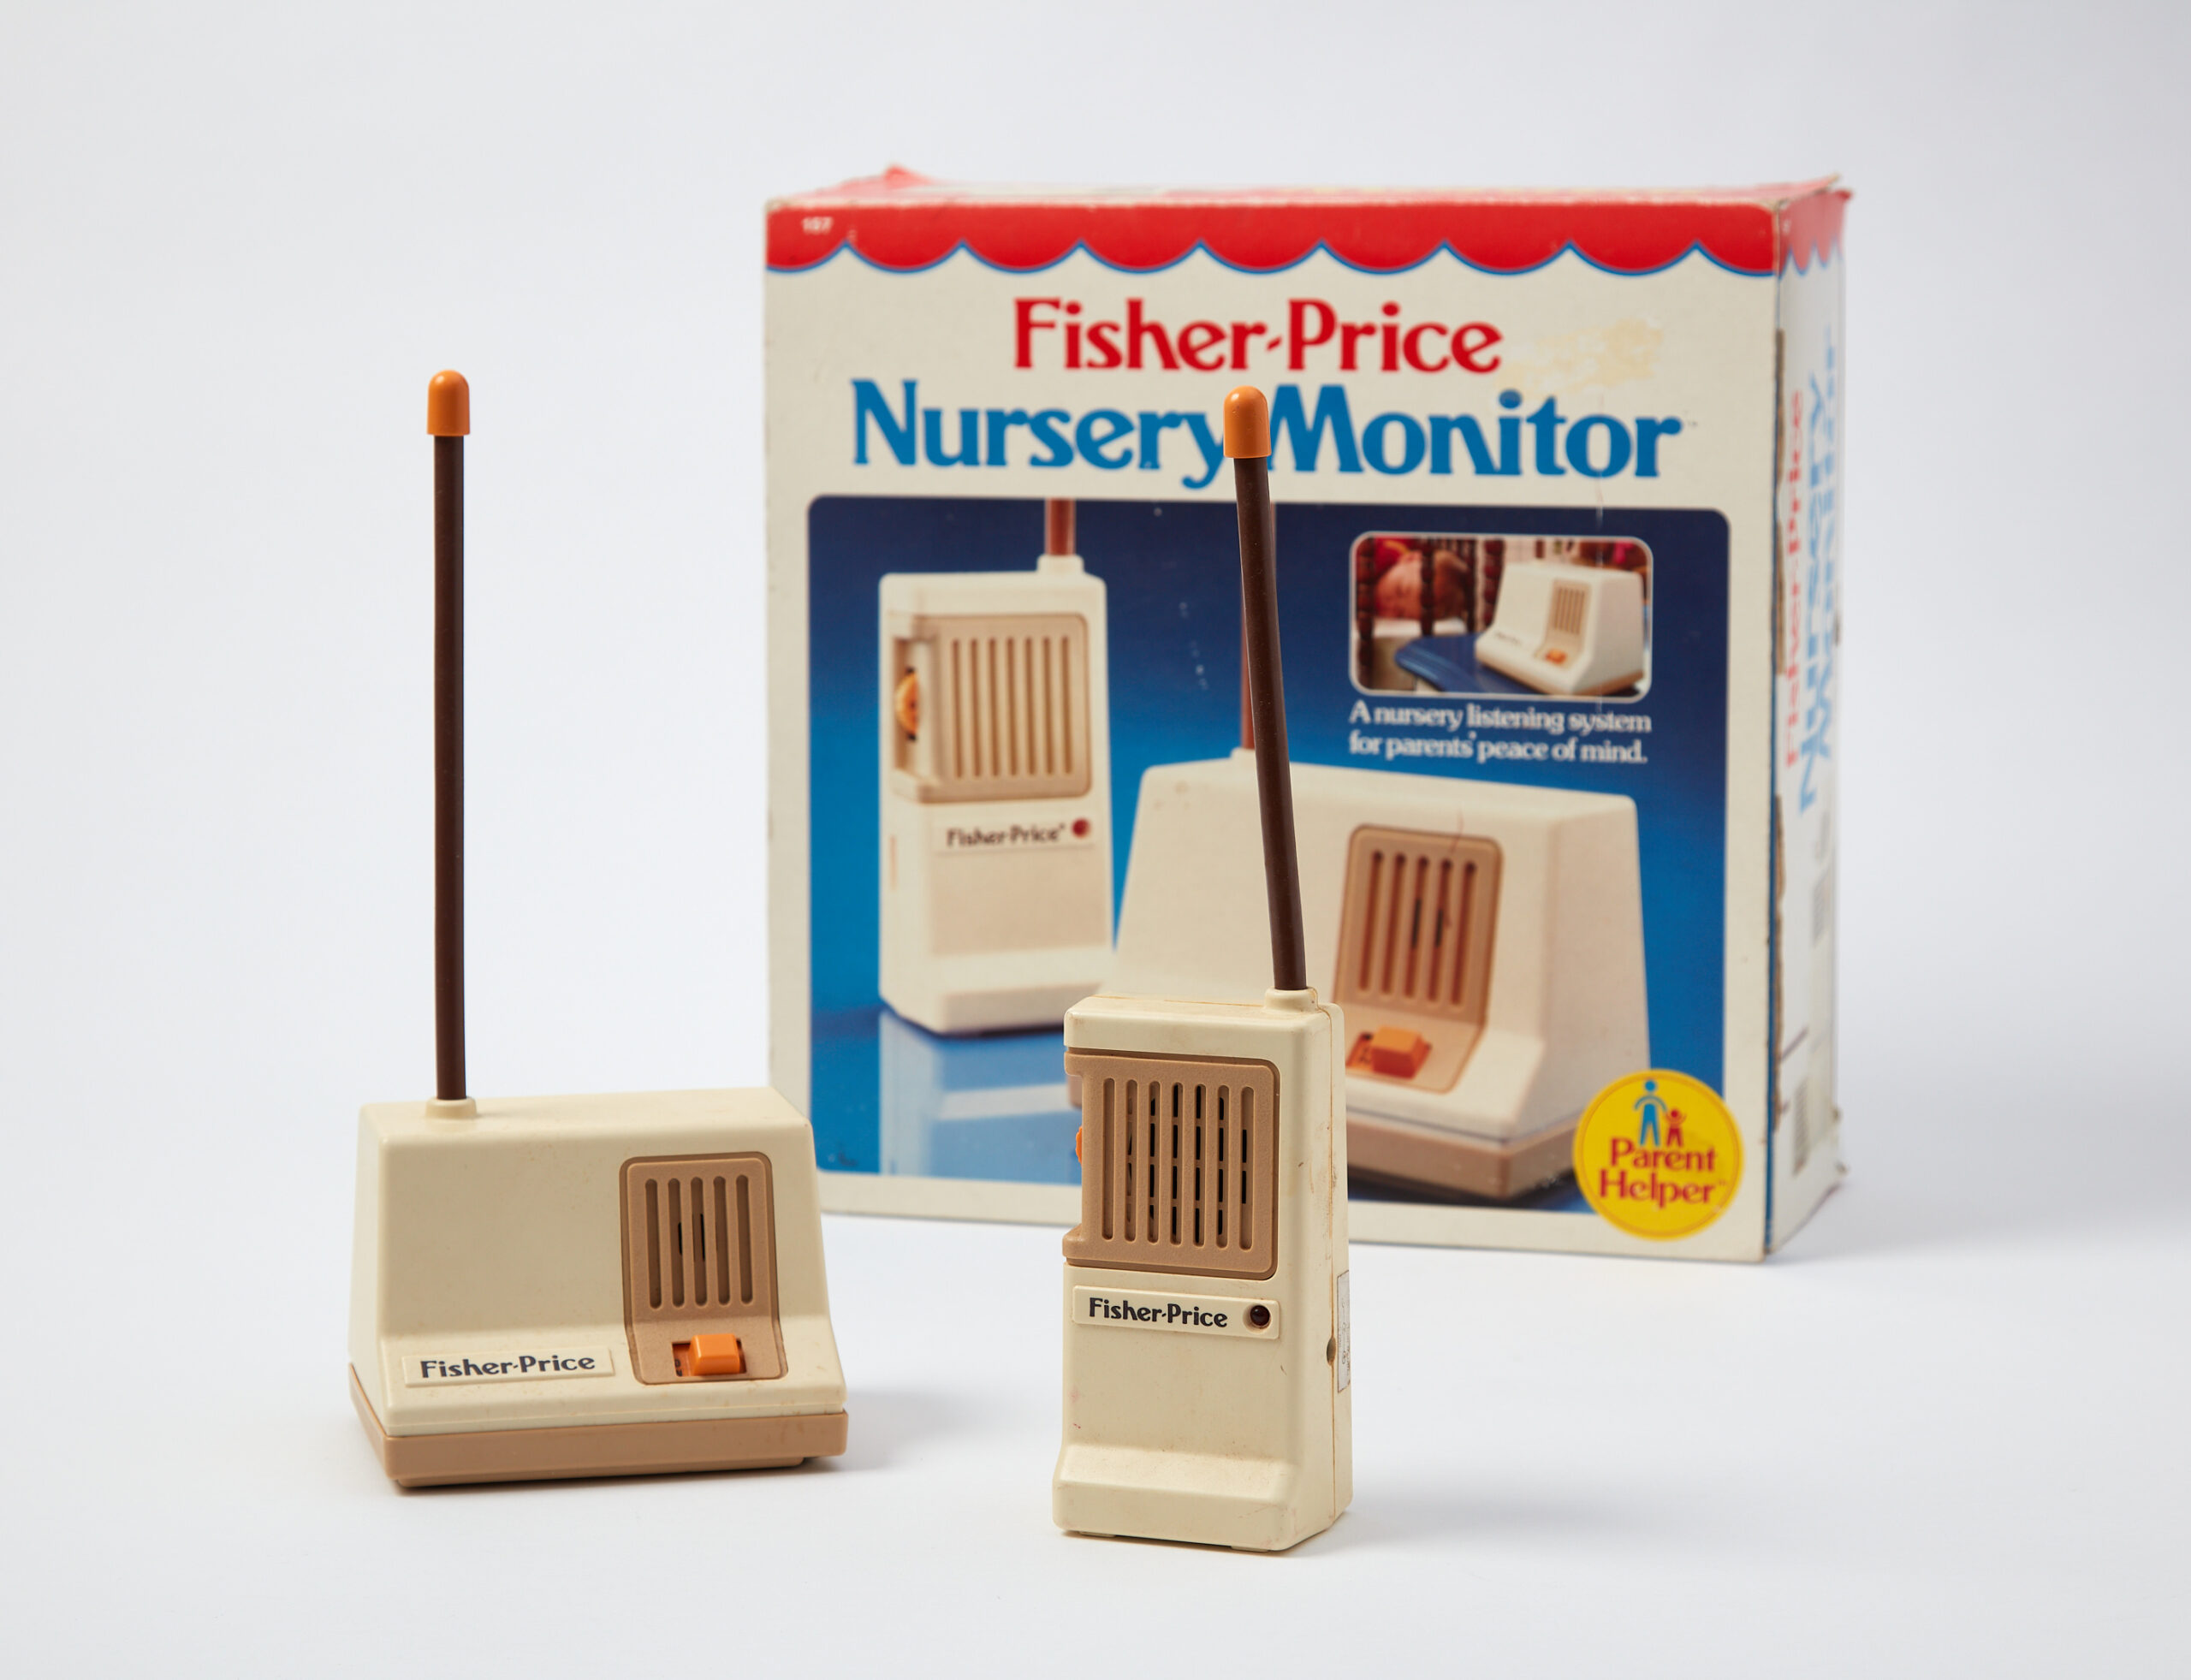 Image of a 183 baby monitor set and original box by Fisher-Price on a white background